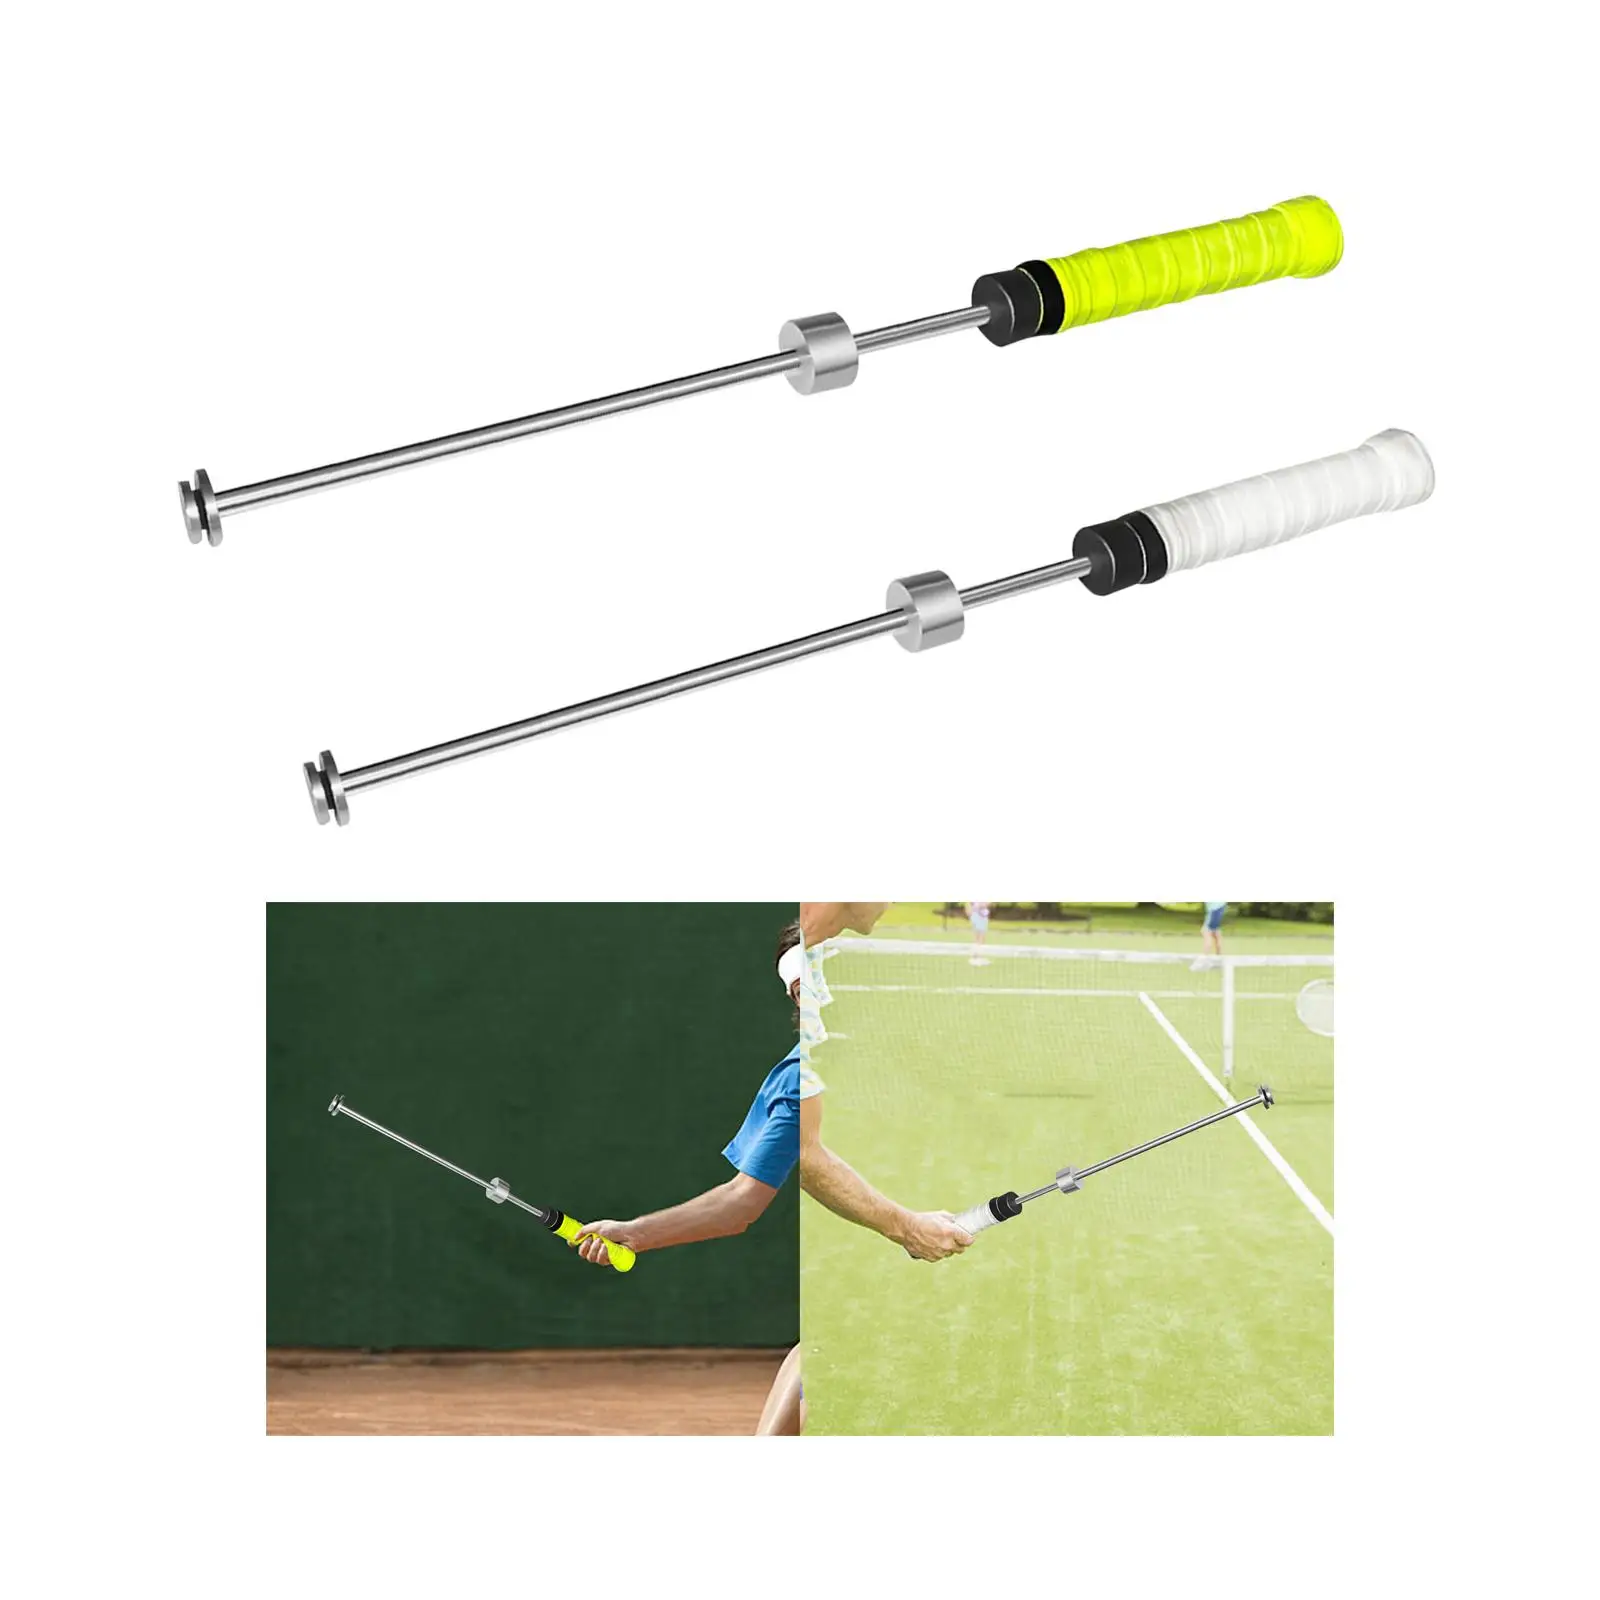 with Sound Beginner Sports Tool Correct Posture Durable Nonslip Grip Tennis